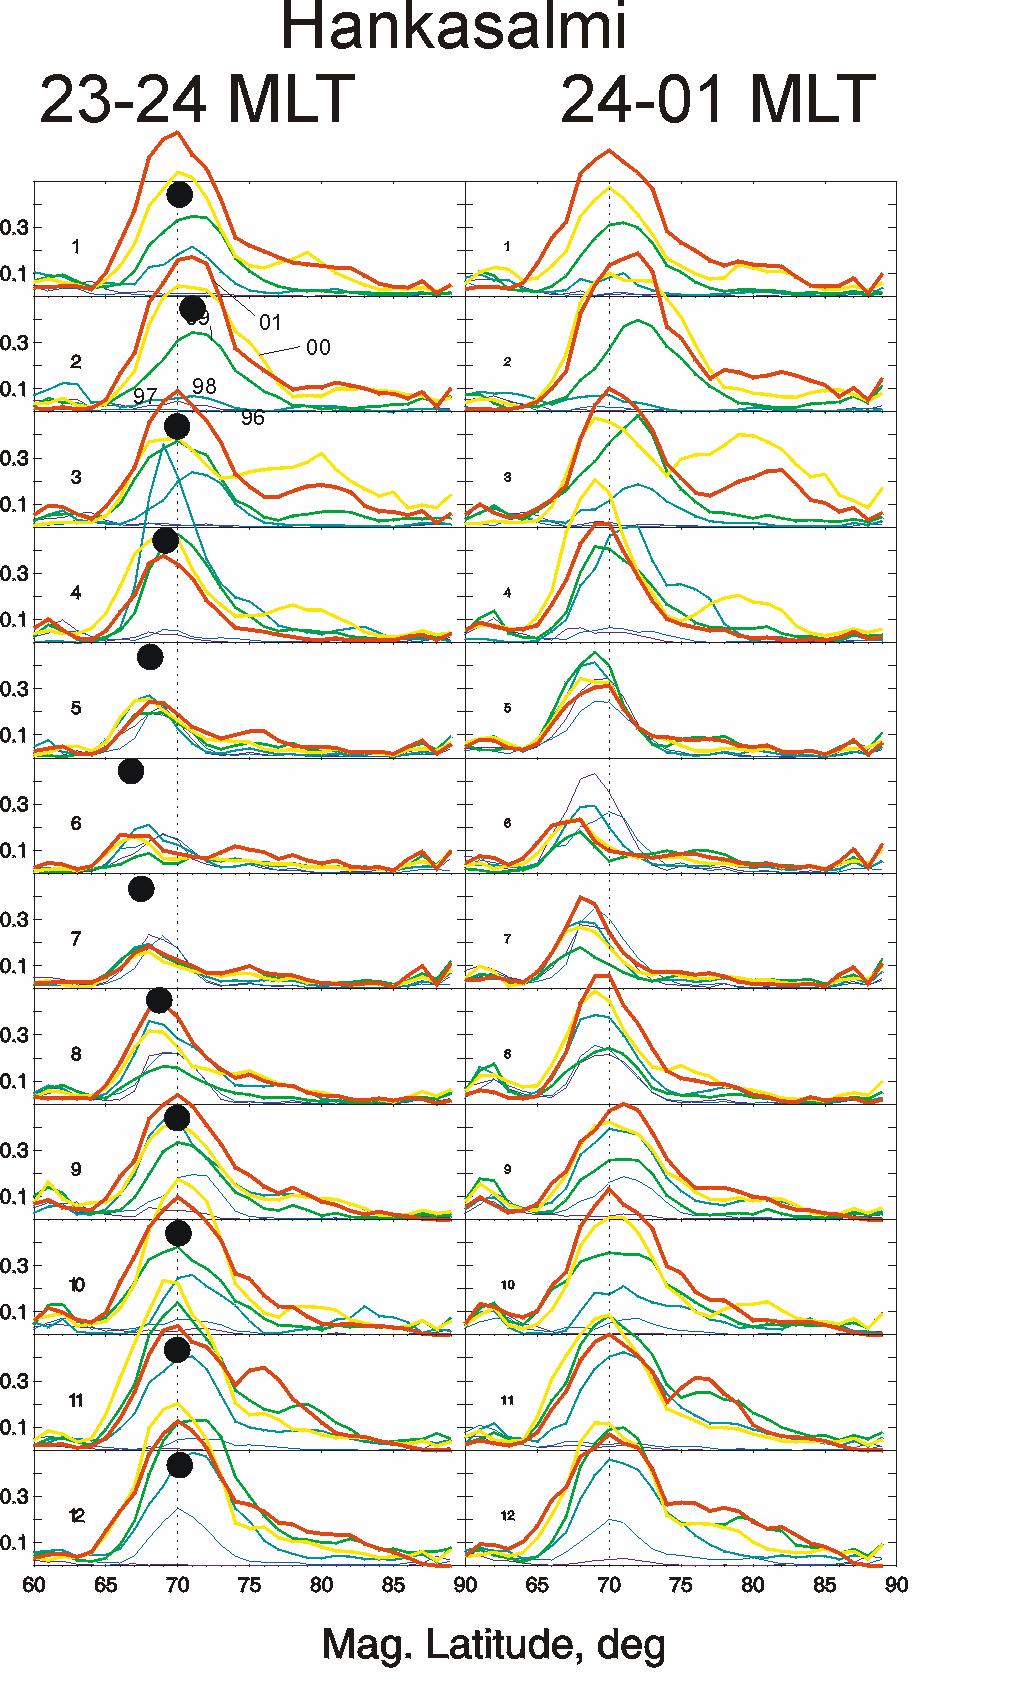 Figure 4.4 Monthly (1-12) variation of echo occurrence for the Hankasalmi radar. Left column is the pre-midnight period and the right column is the post-midnight.